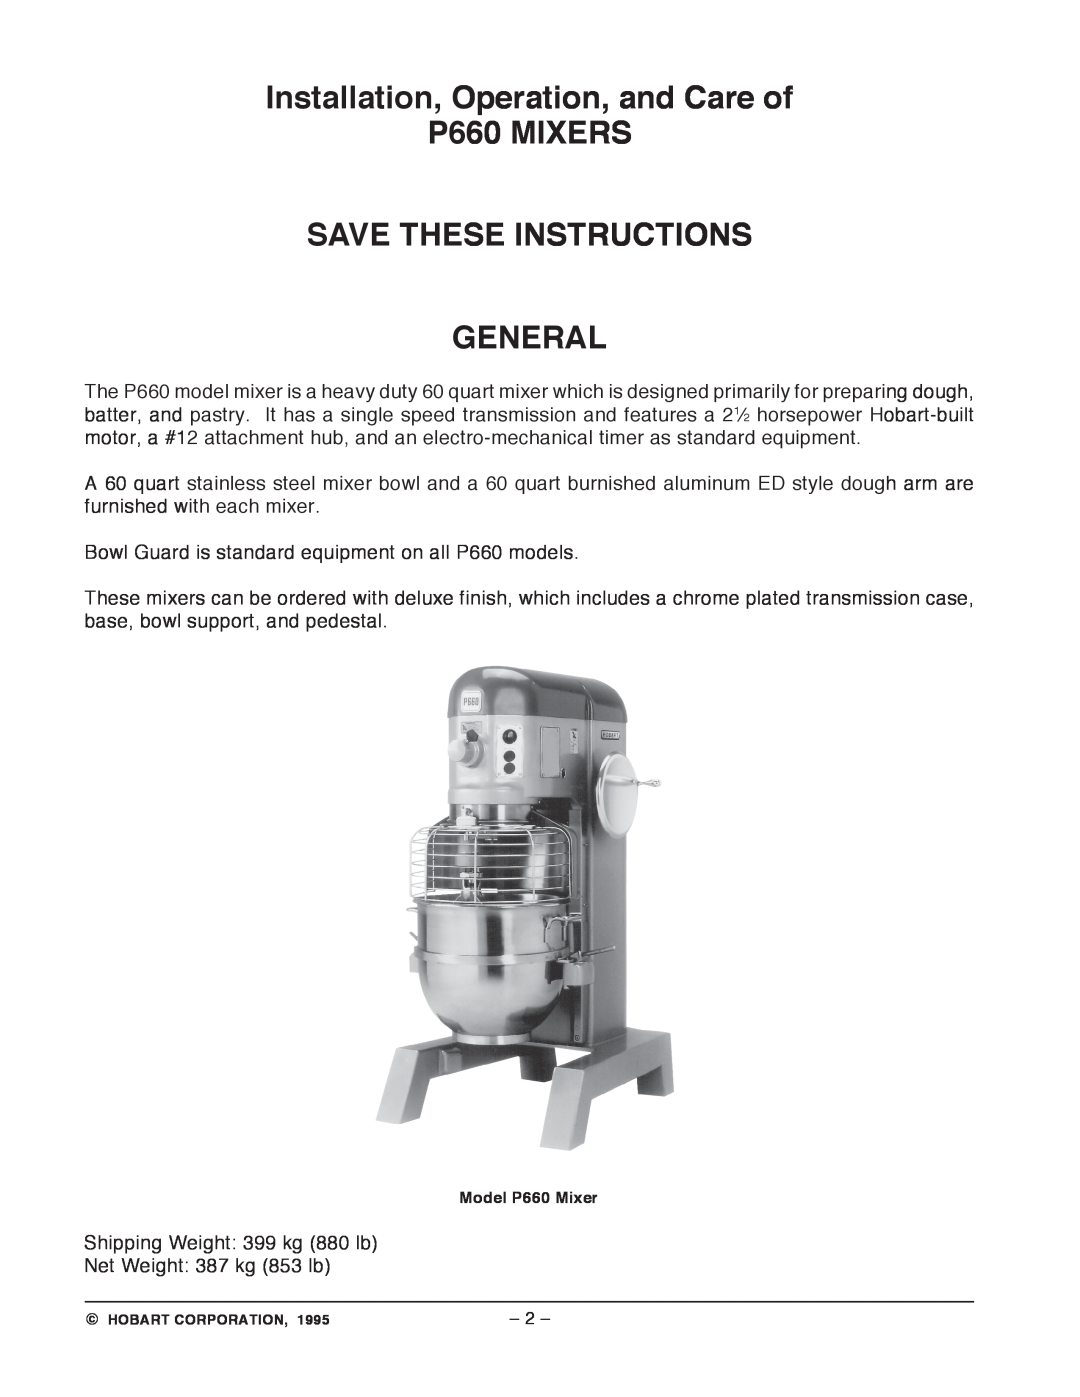 Hobart manual Installation, Operation, and Care of P660 MIXERS, Save These Instructions General 